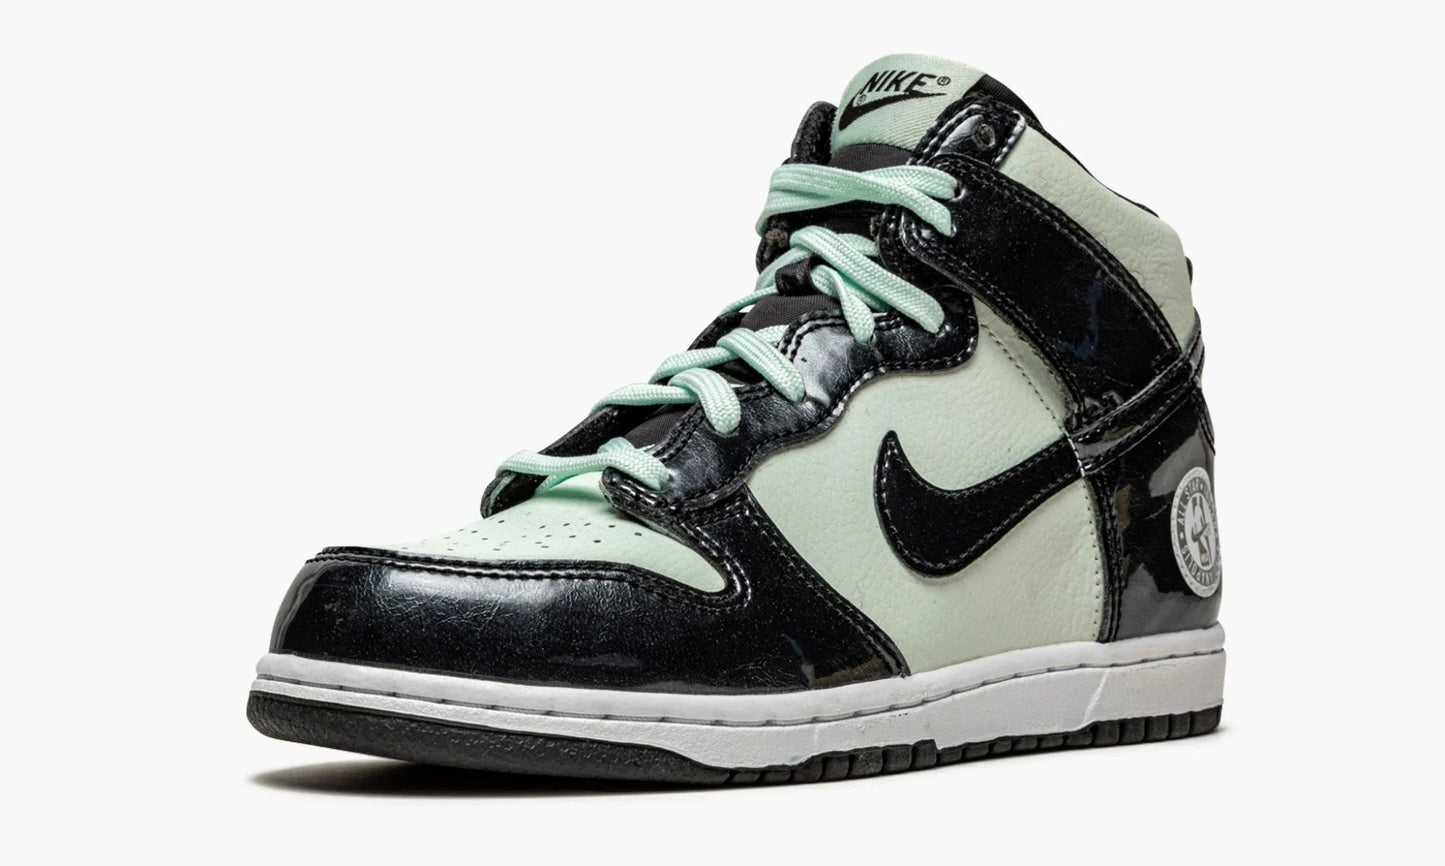 Dunk High SE PS "All Star 2021"